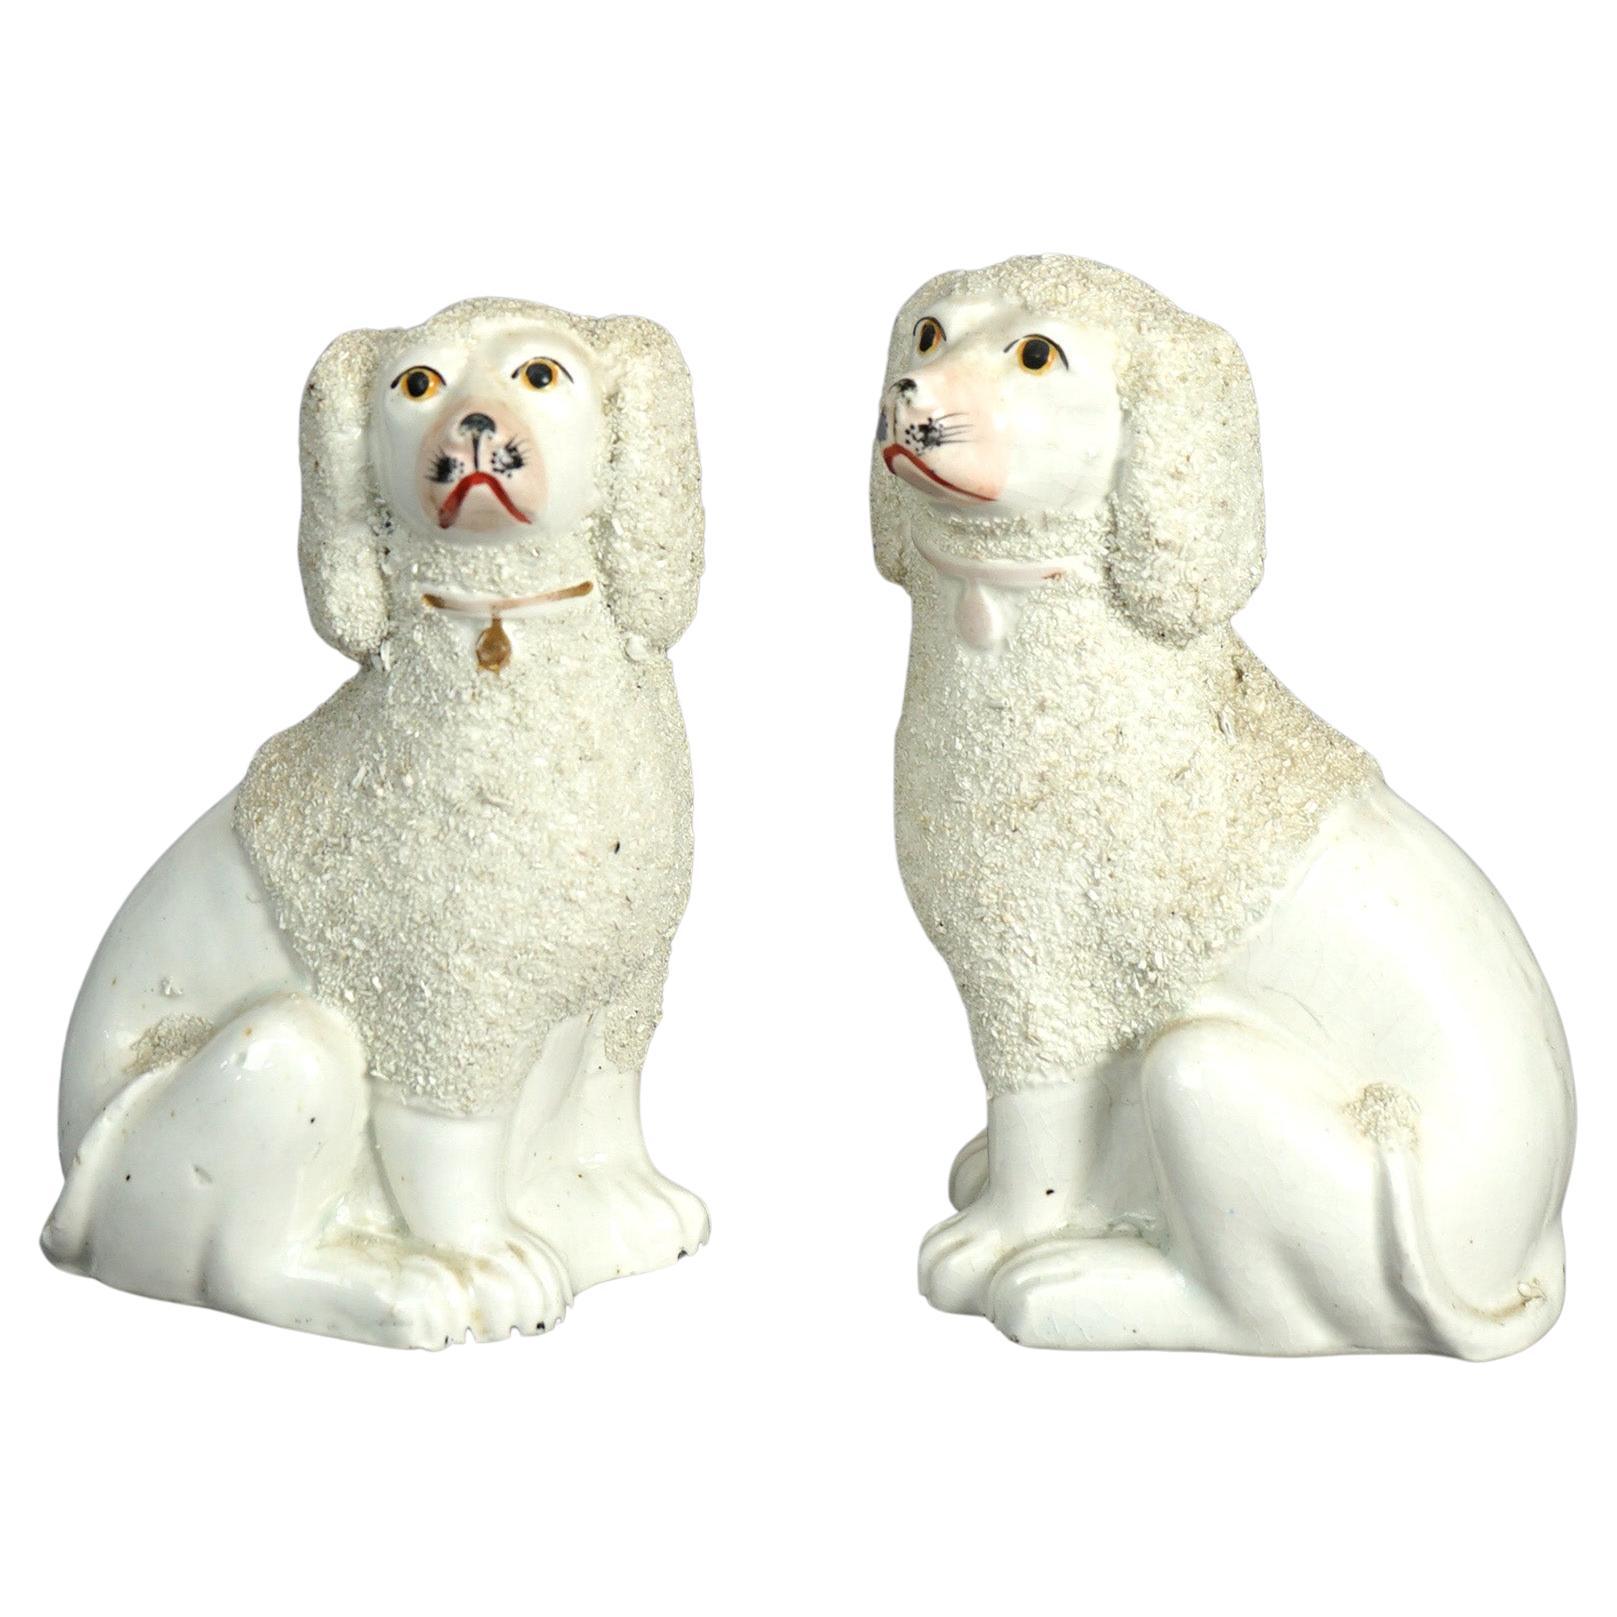 Antique Pair of English Staffordshire Porcelain Dogs C1870